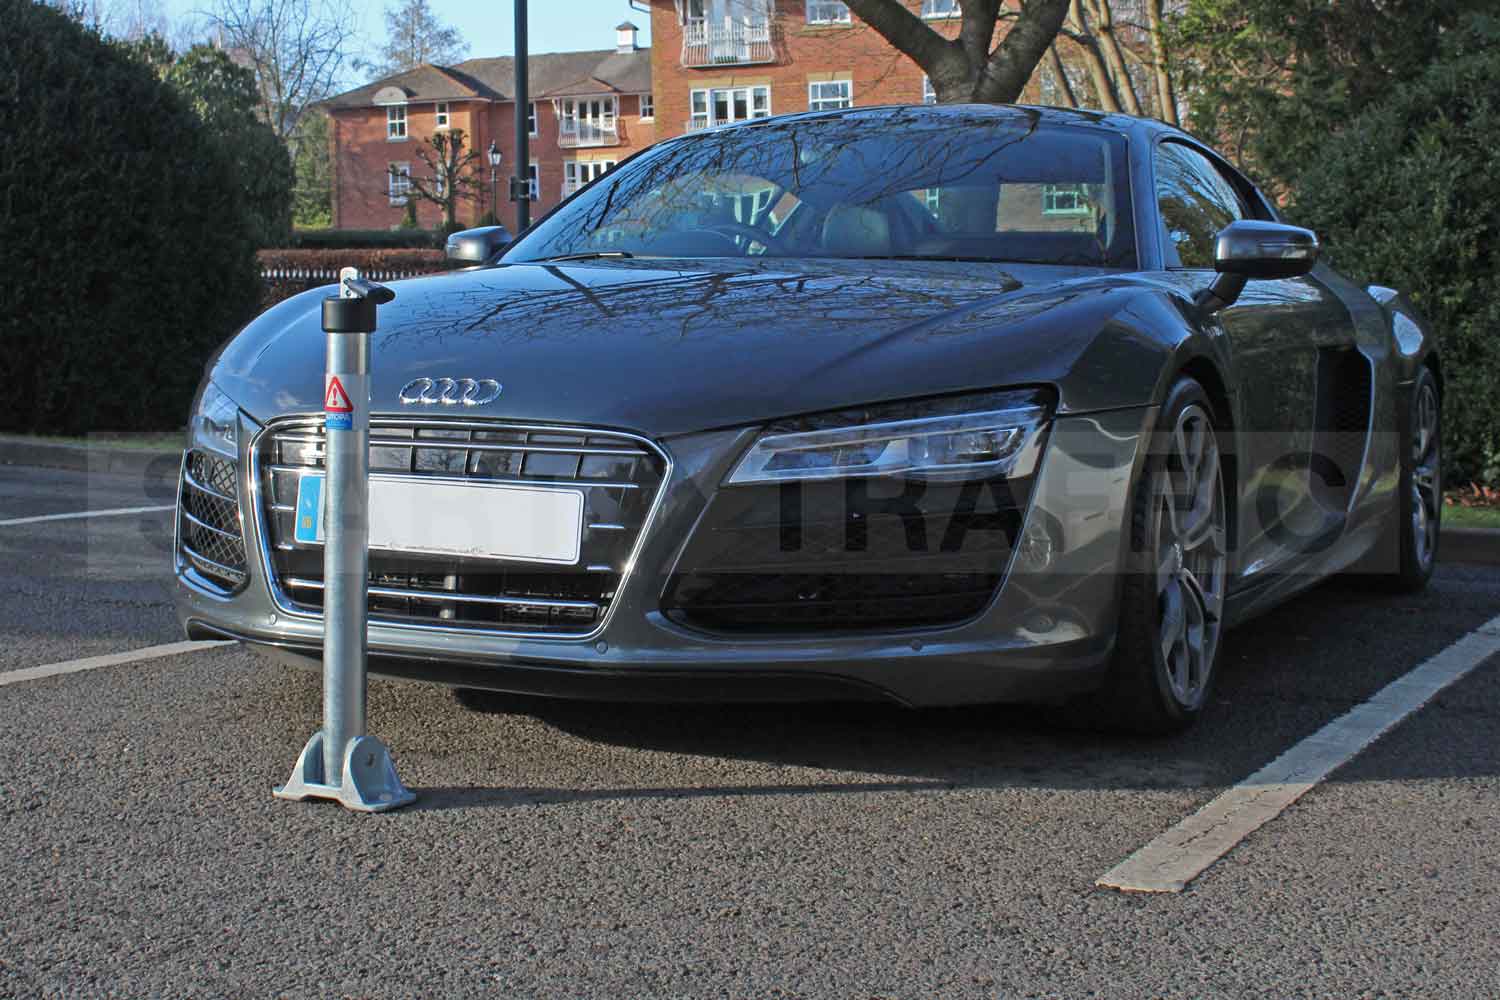 Hinged Padlock Parking post being used to reserve a space